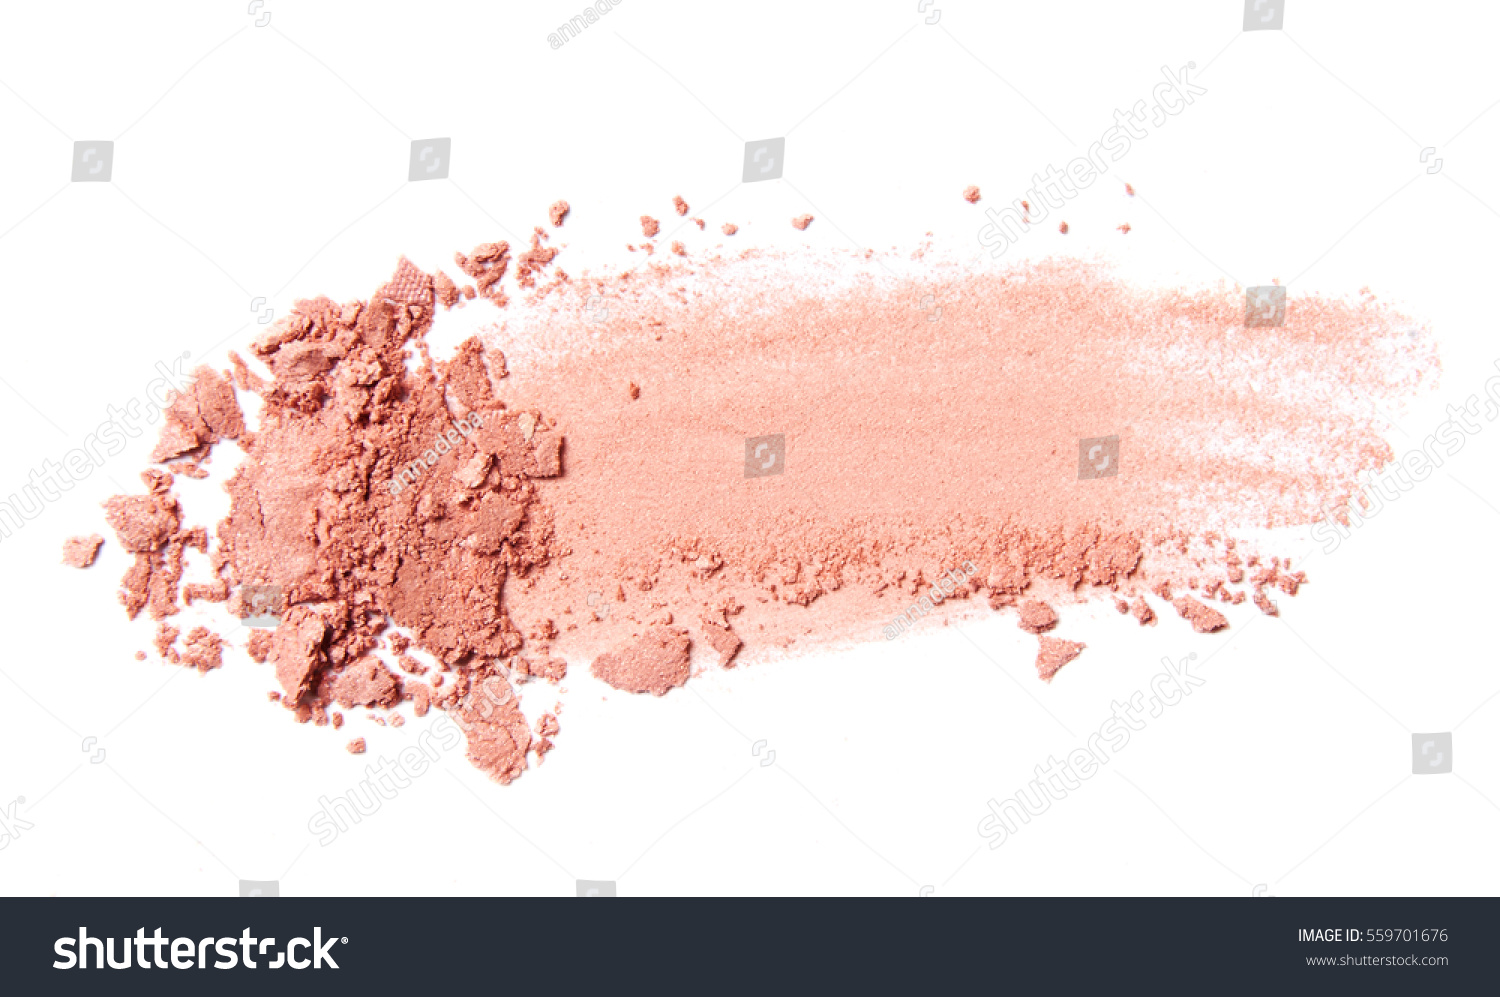 pink coral eyeshadow and blush trace isolated on white background
 #559701676